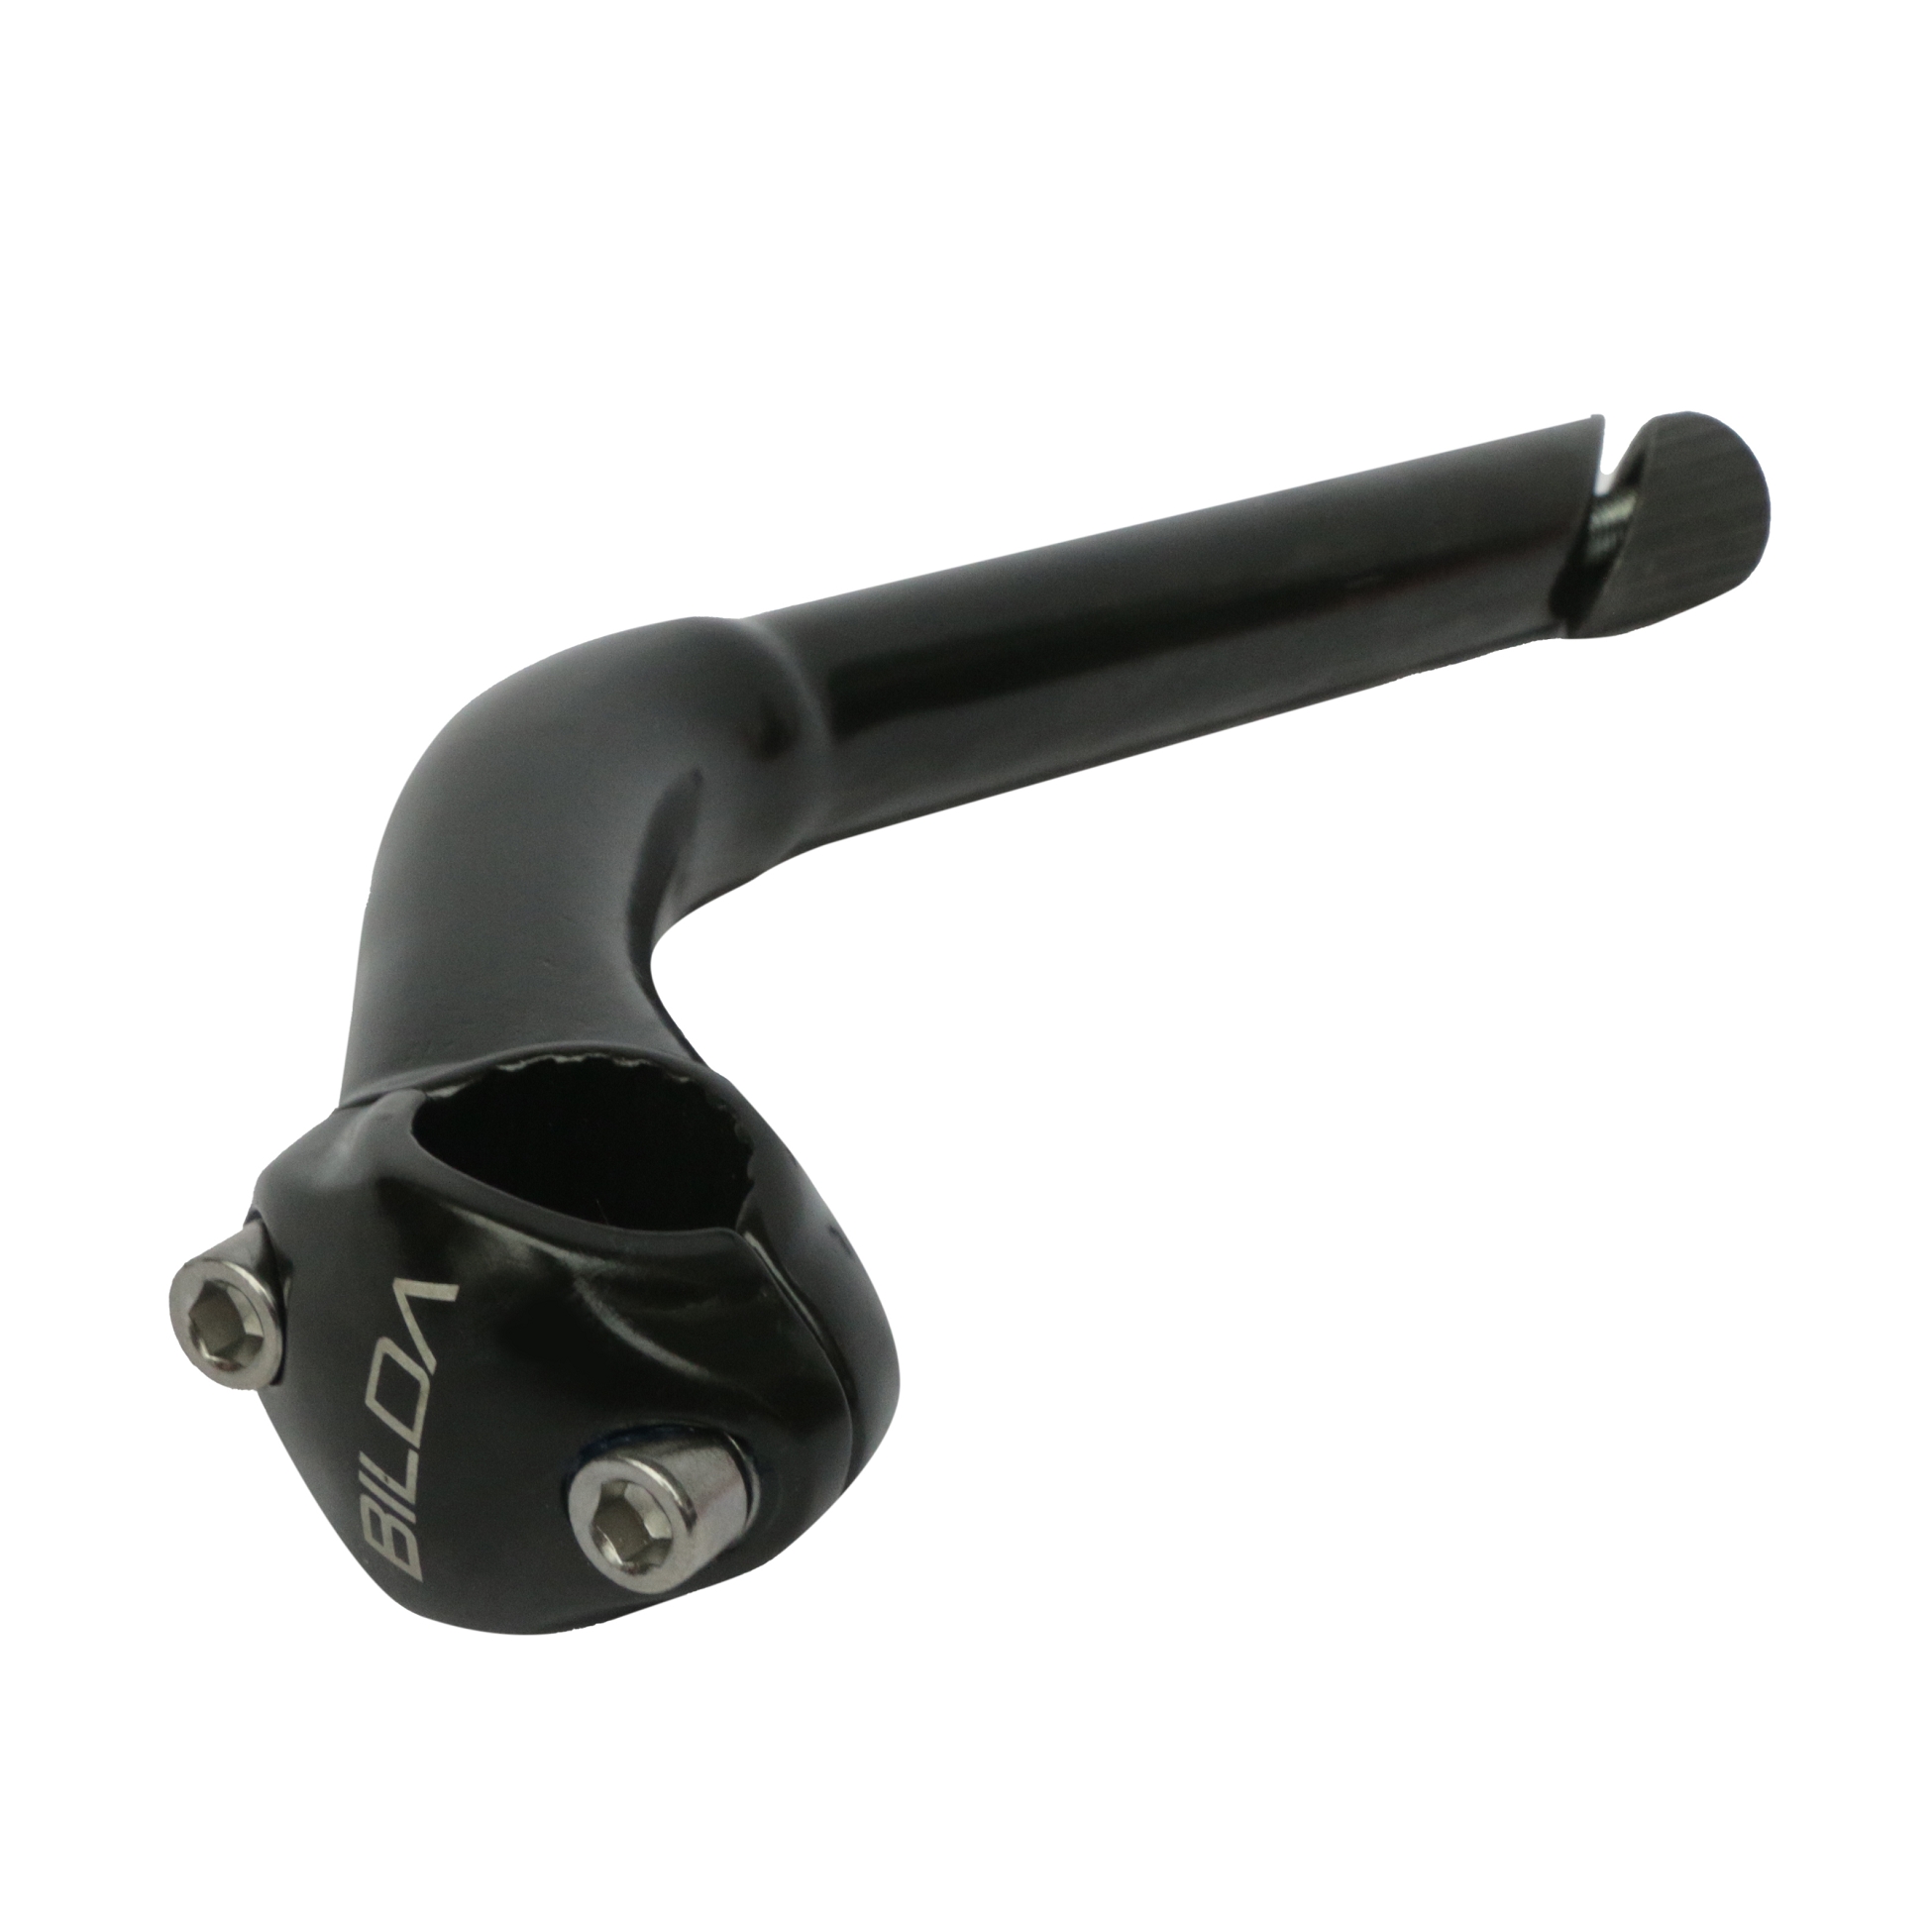 UltraCycle Adjustable 1" Quill Stem Black 90mm Bike